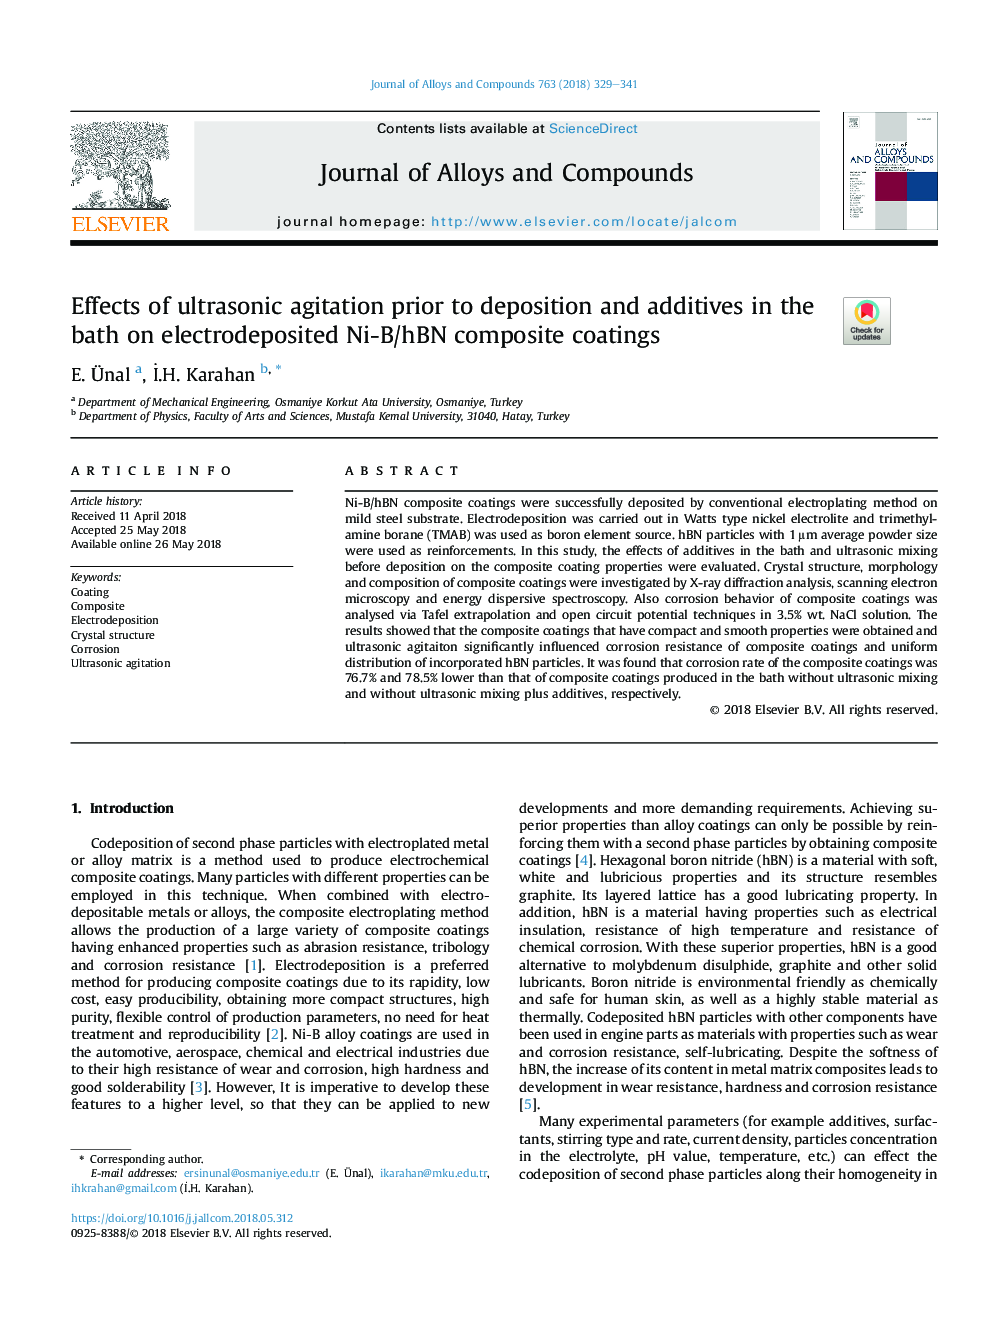 Effects of ultrasonic agitation prior to deposition and additives in the bath on electrodeposited Ni-B/hBN composite coatings